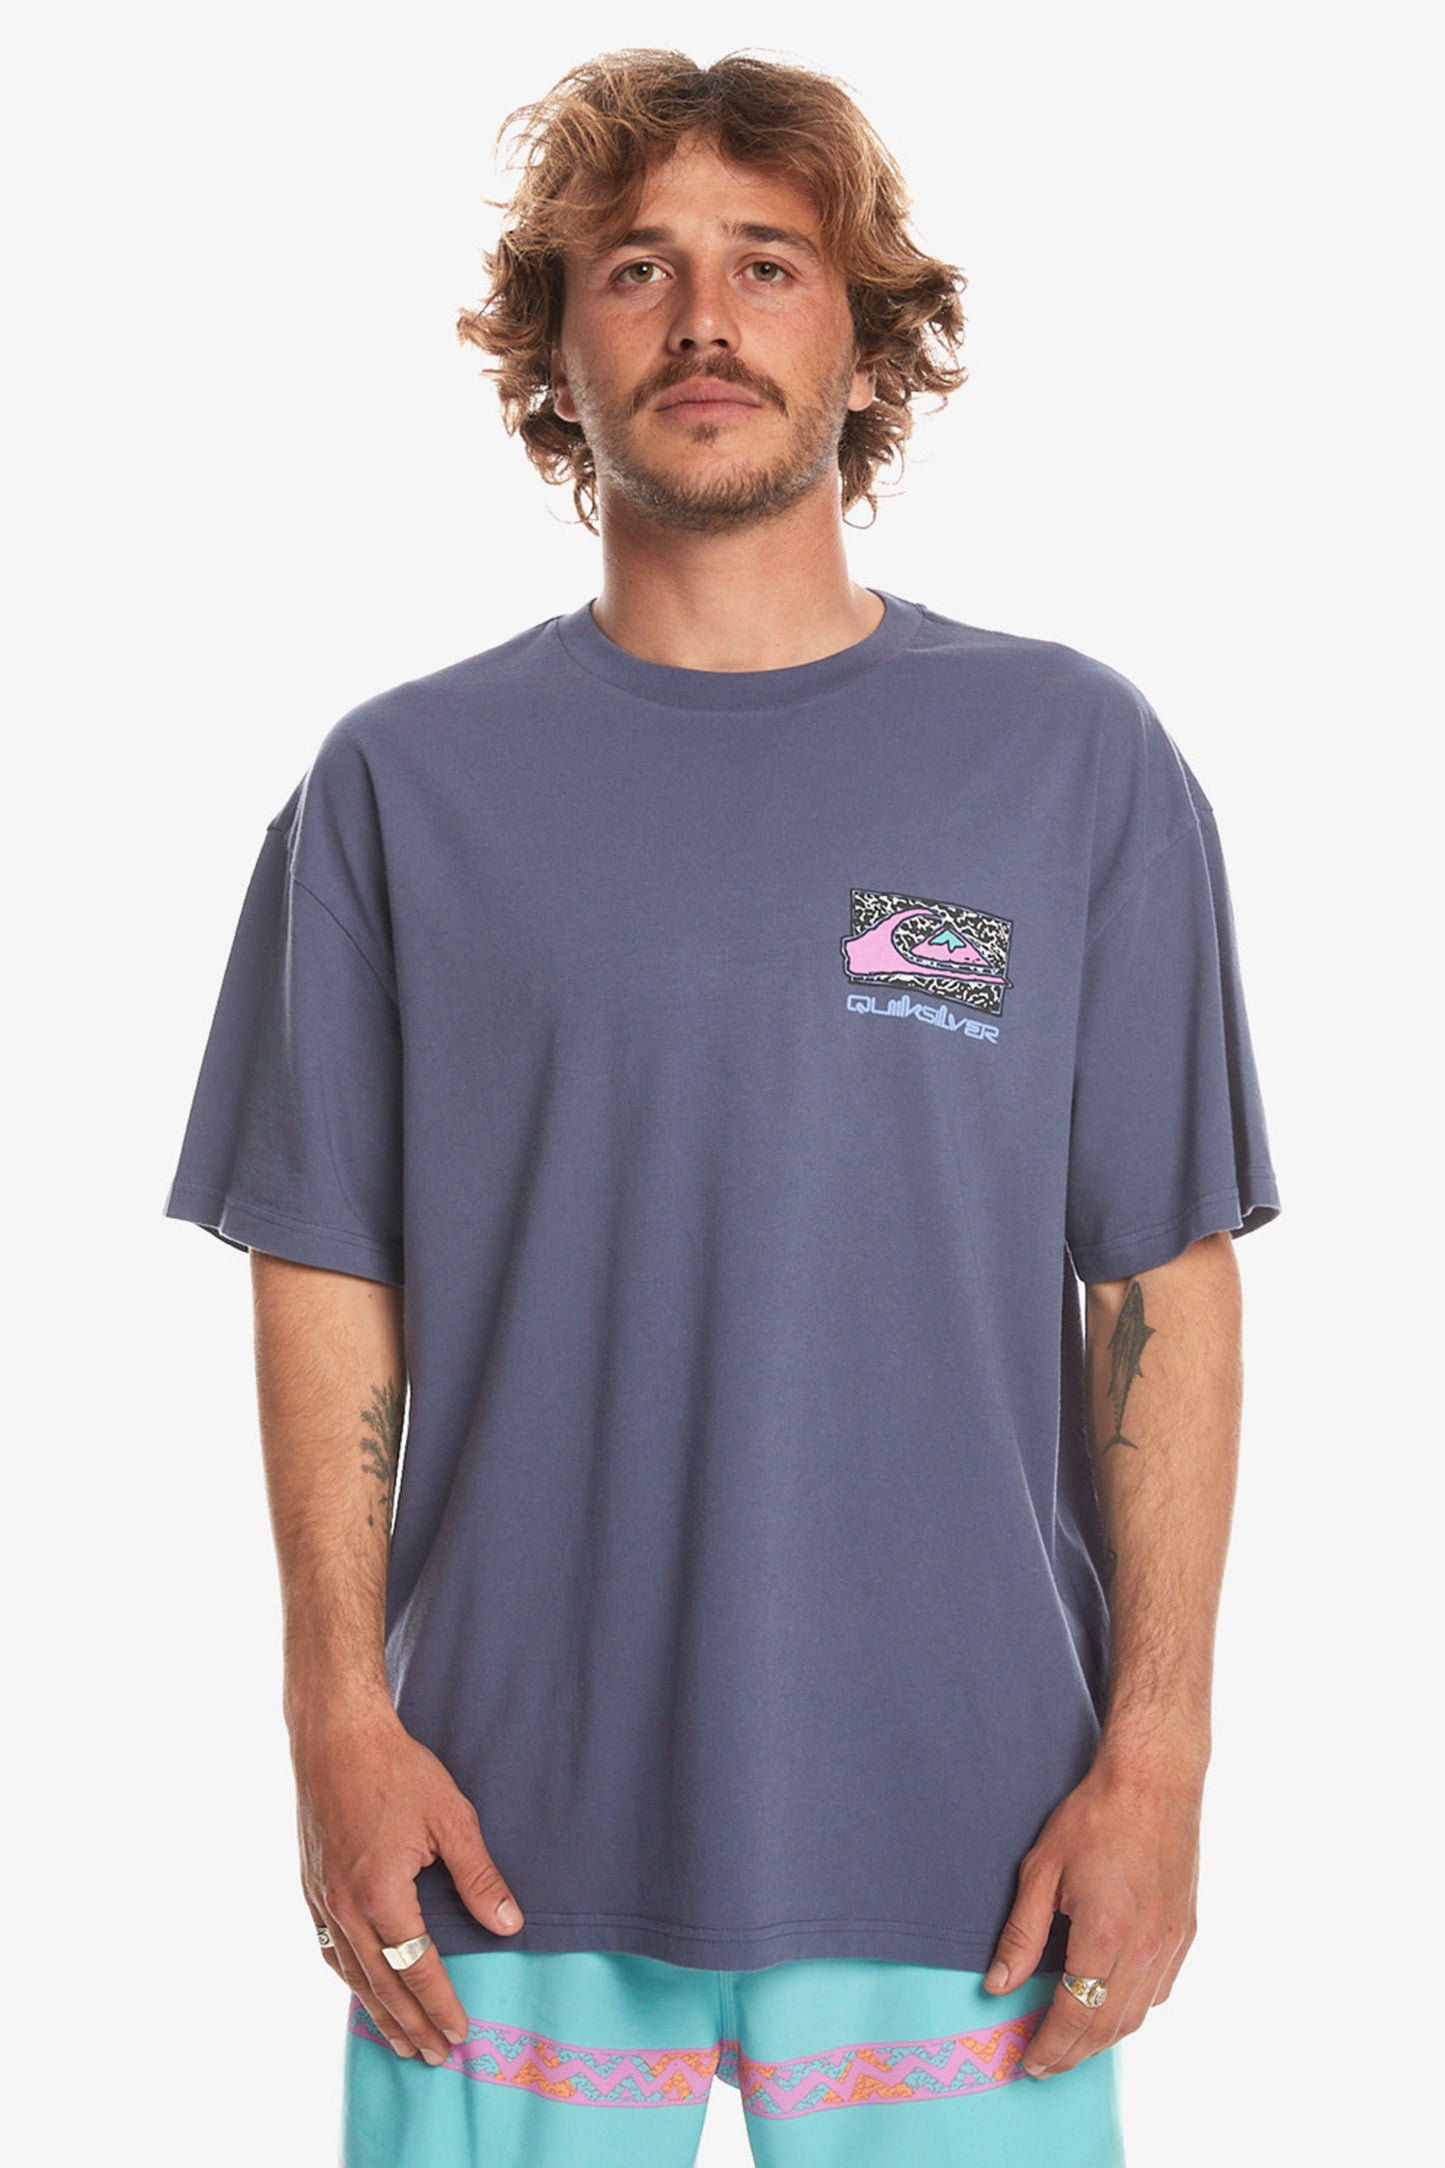 PUKAS-SURF-SHOP-TEE-MAN-QUIKSILVER-EVERYDAY-SPIN-CYRCLE-CROWN-BLUE